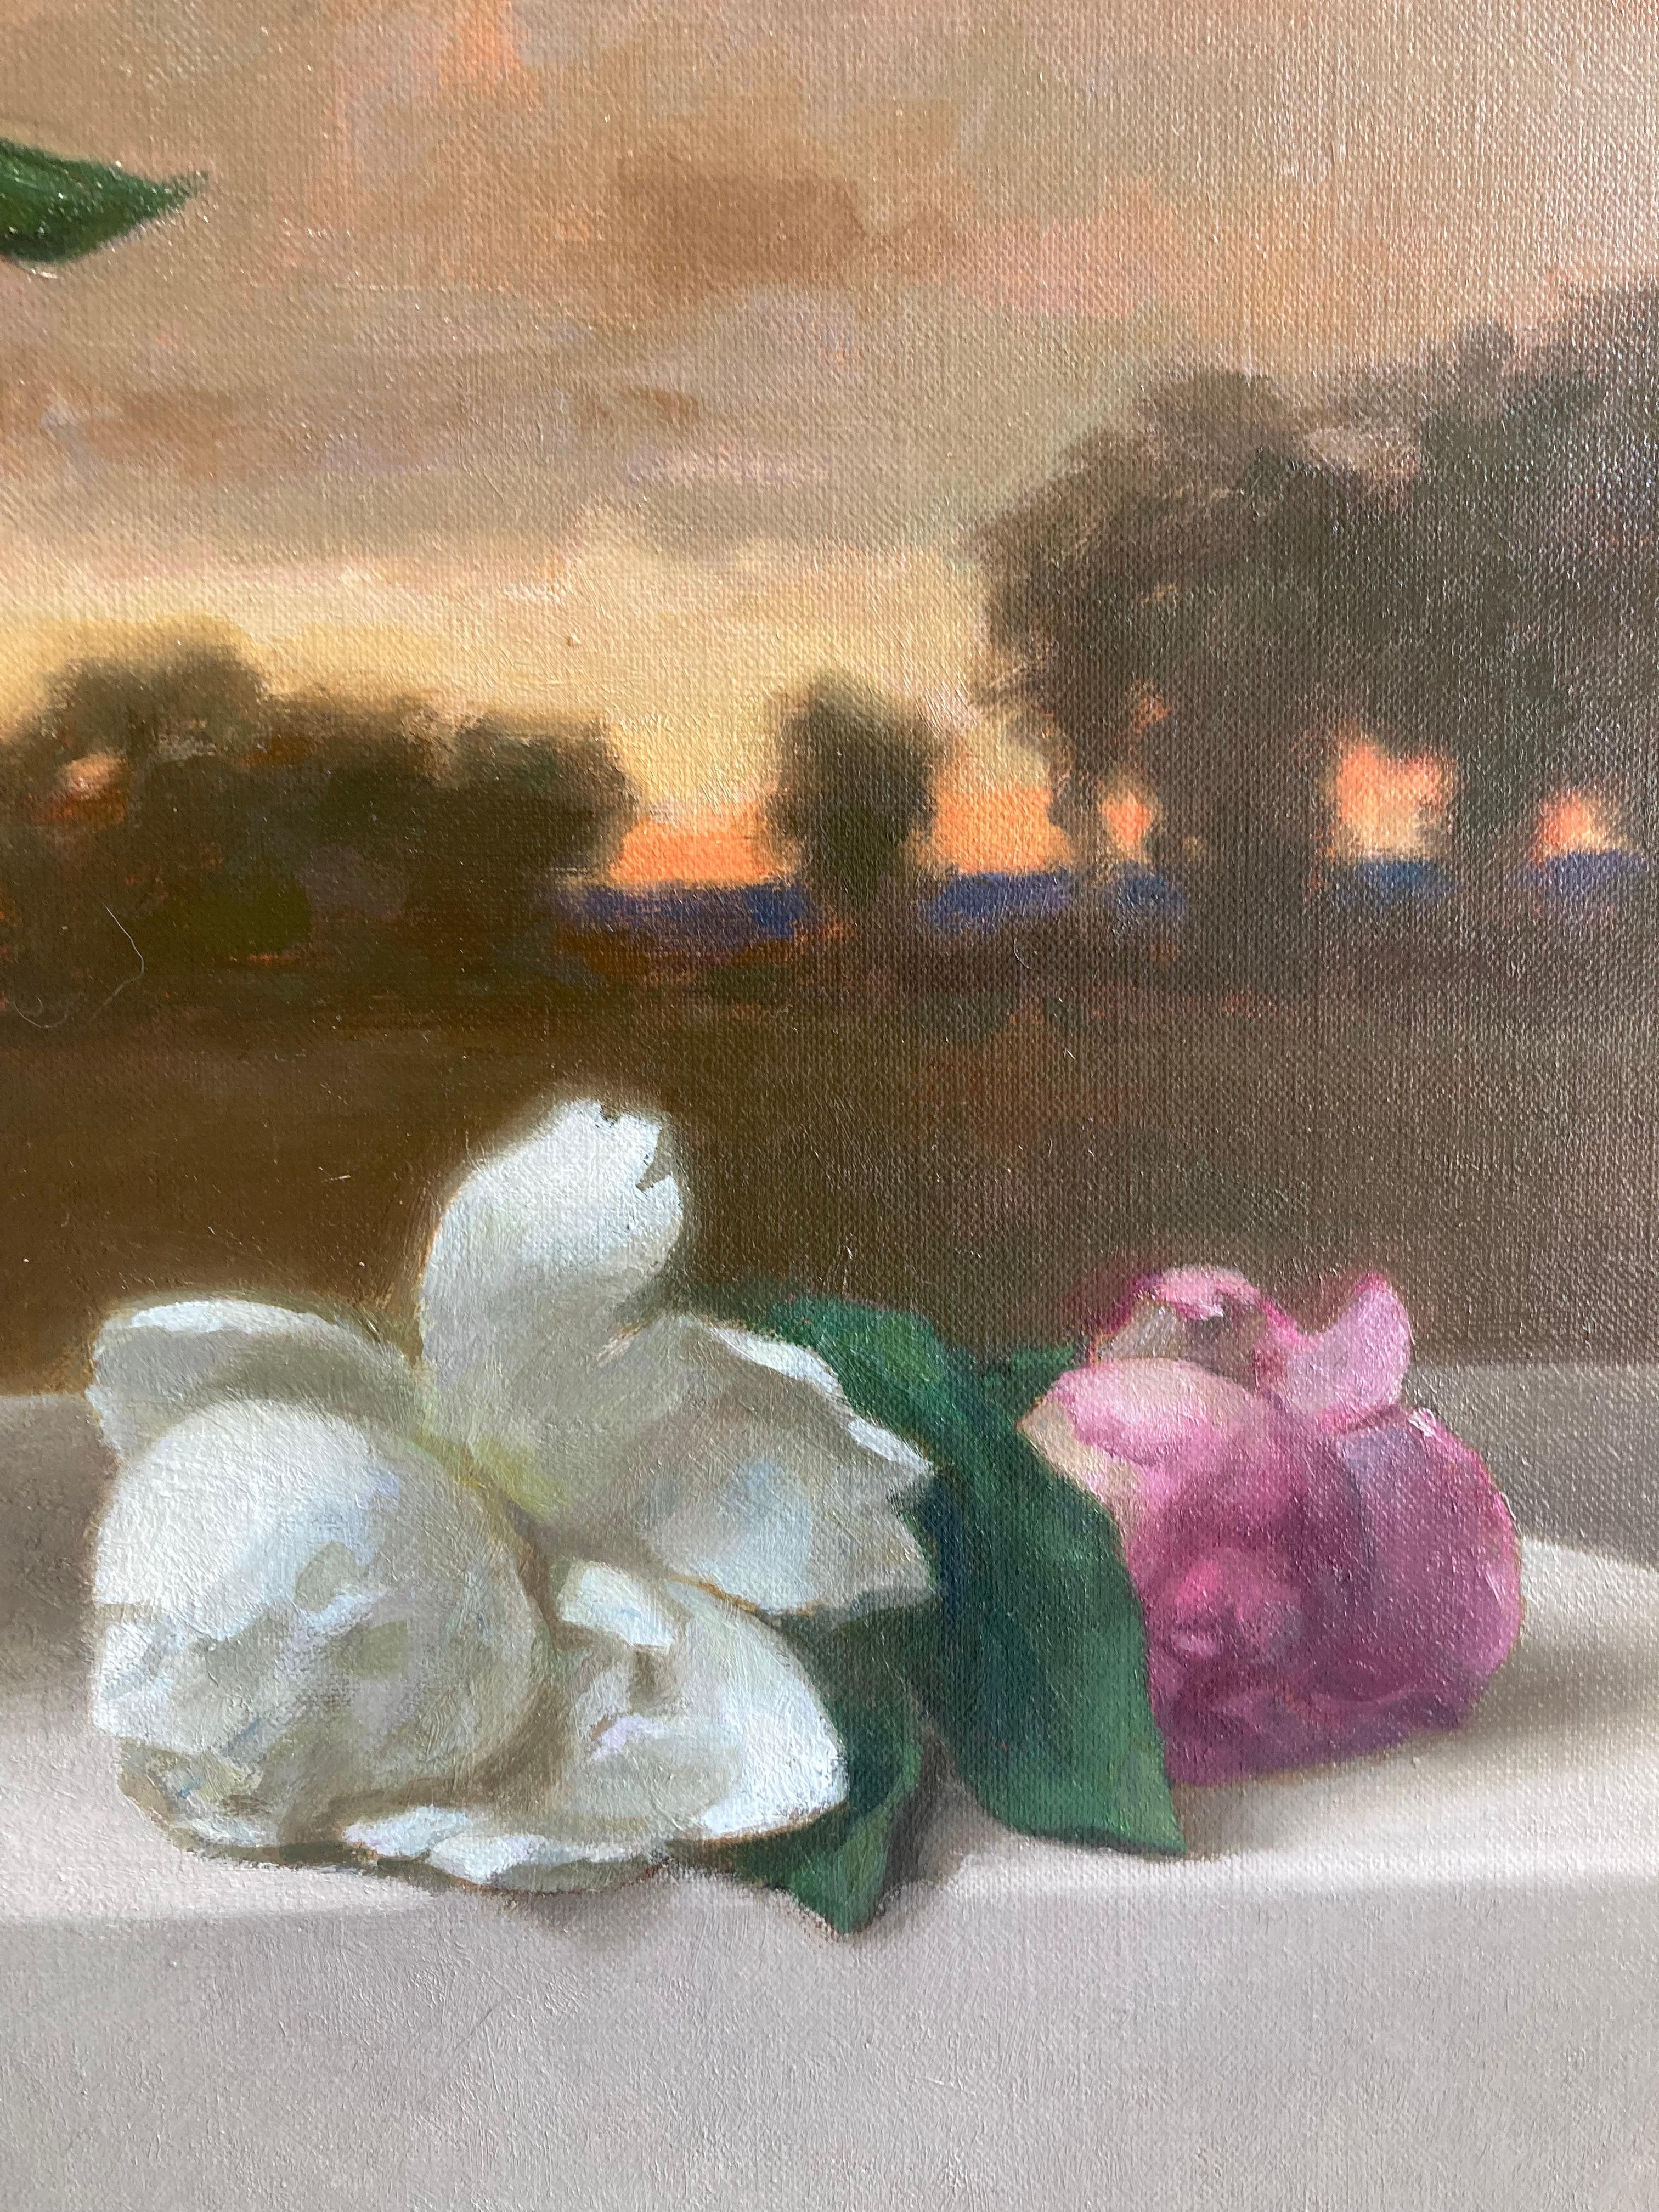 A moody and surrealistic still life of peonies. While the scene seems to take place outside, the reflection in the vase reveals a window with light streaming into a dark room. As always, Levin's painting invites viewers to look closely. 